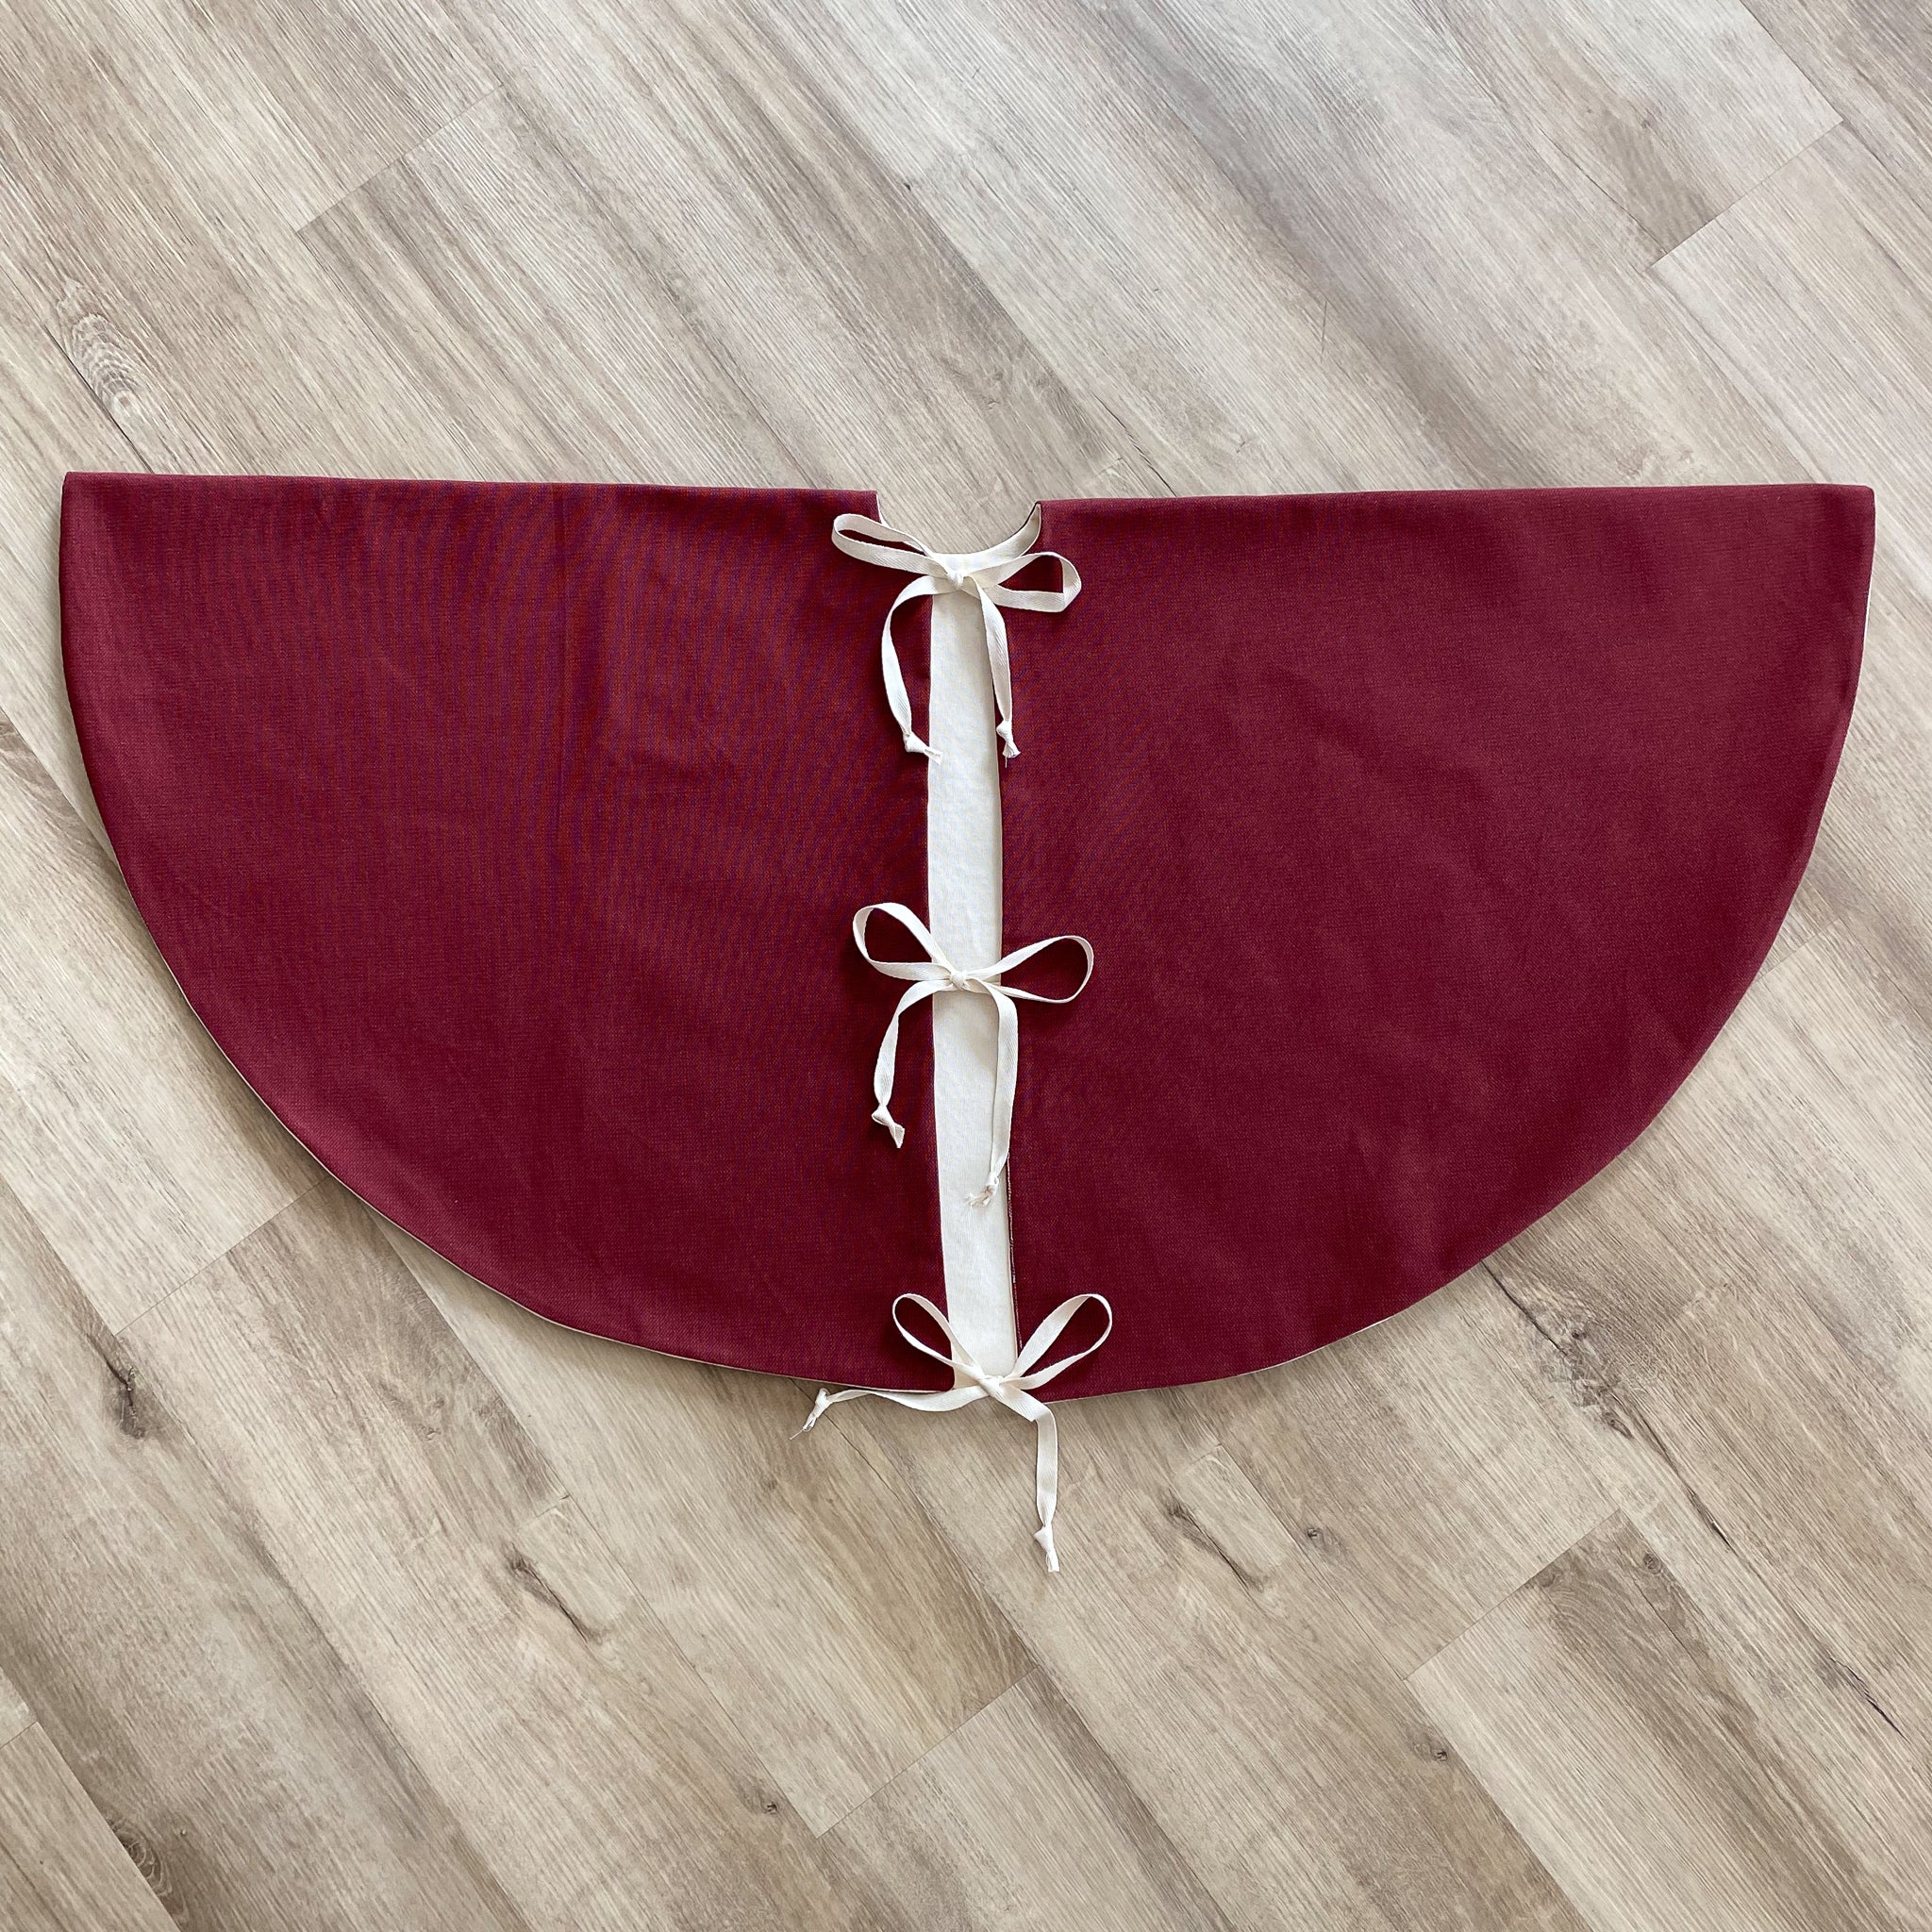 Cranberry Christmas Tree Skirt, Solid Red Christmas Tree Skirt, Christmas Tree Skirt, Hackner Home Christmas Tree Skirt, Hackner Home, Designer Christmas Tree Skirt, Handmade Christmas Tree Skirt